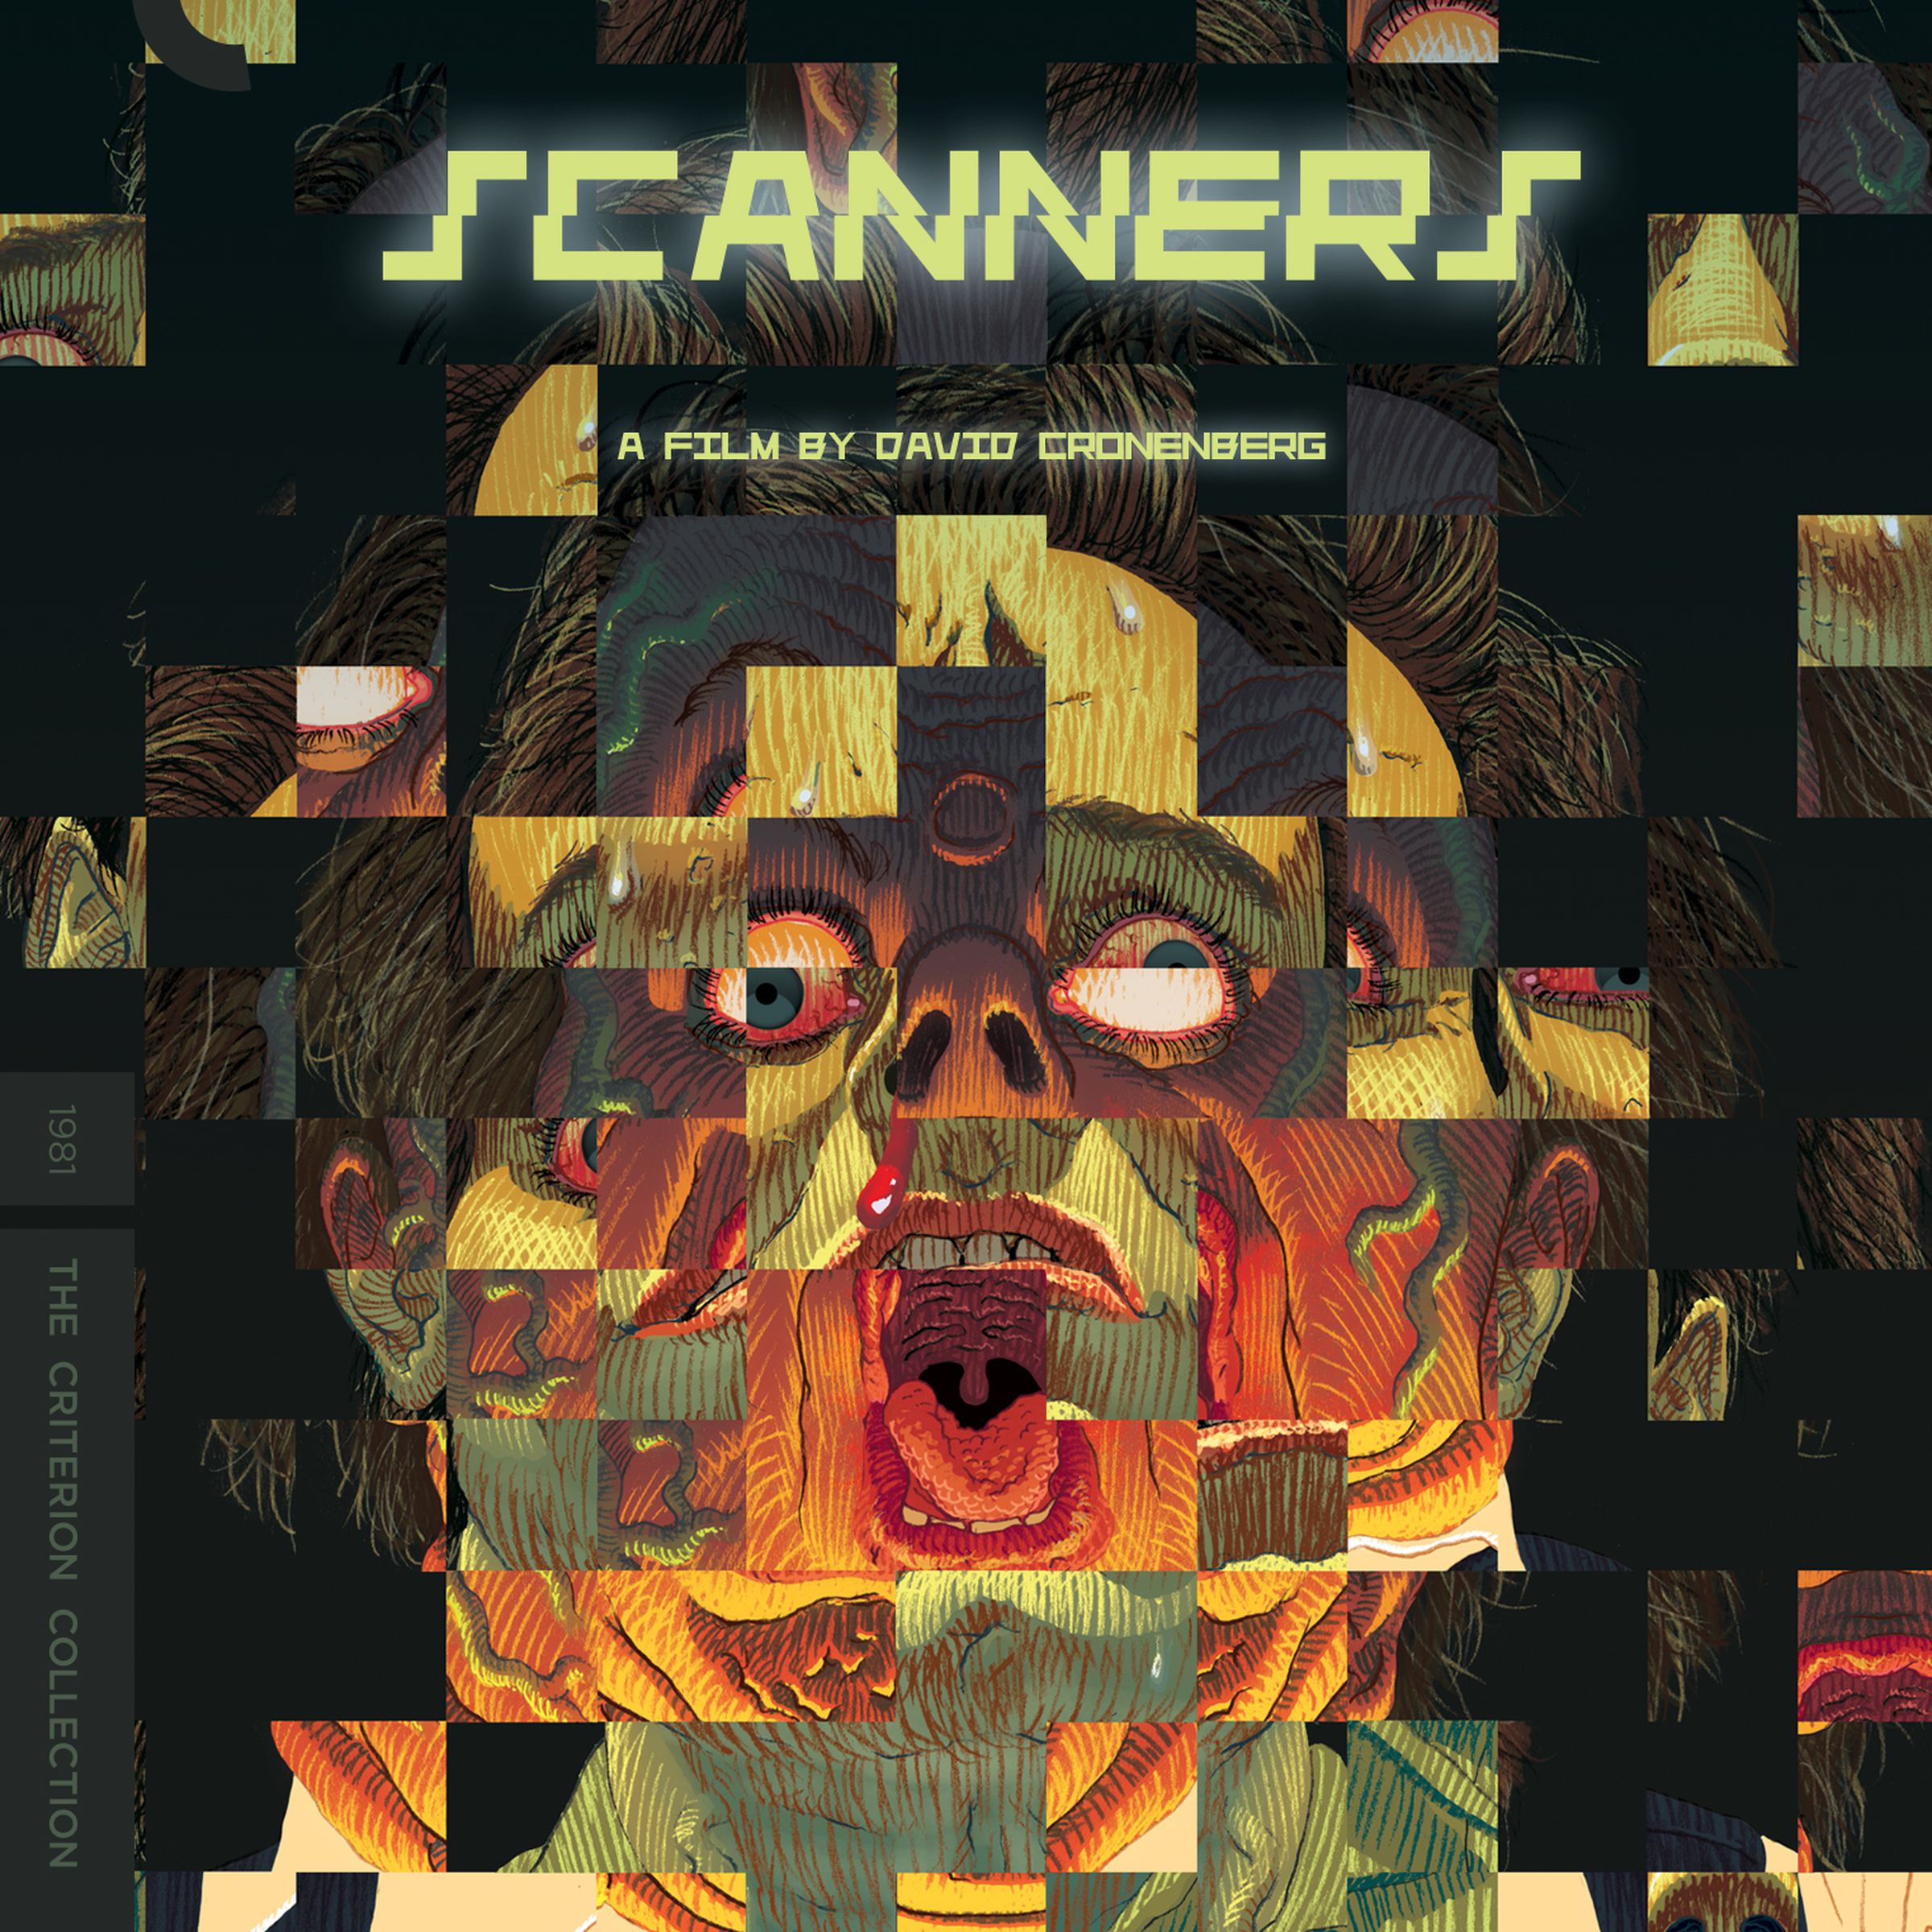 'Scanners' cover art from the Criterion Collection edition by Connor Williumsen